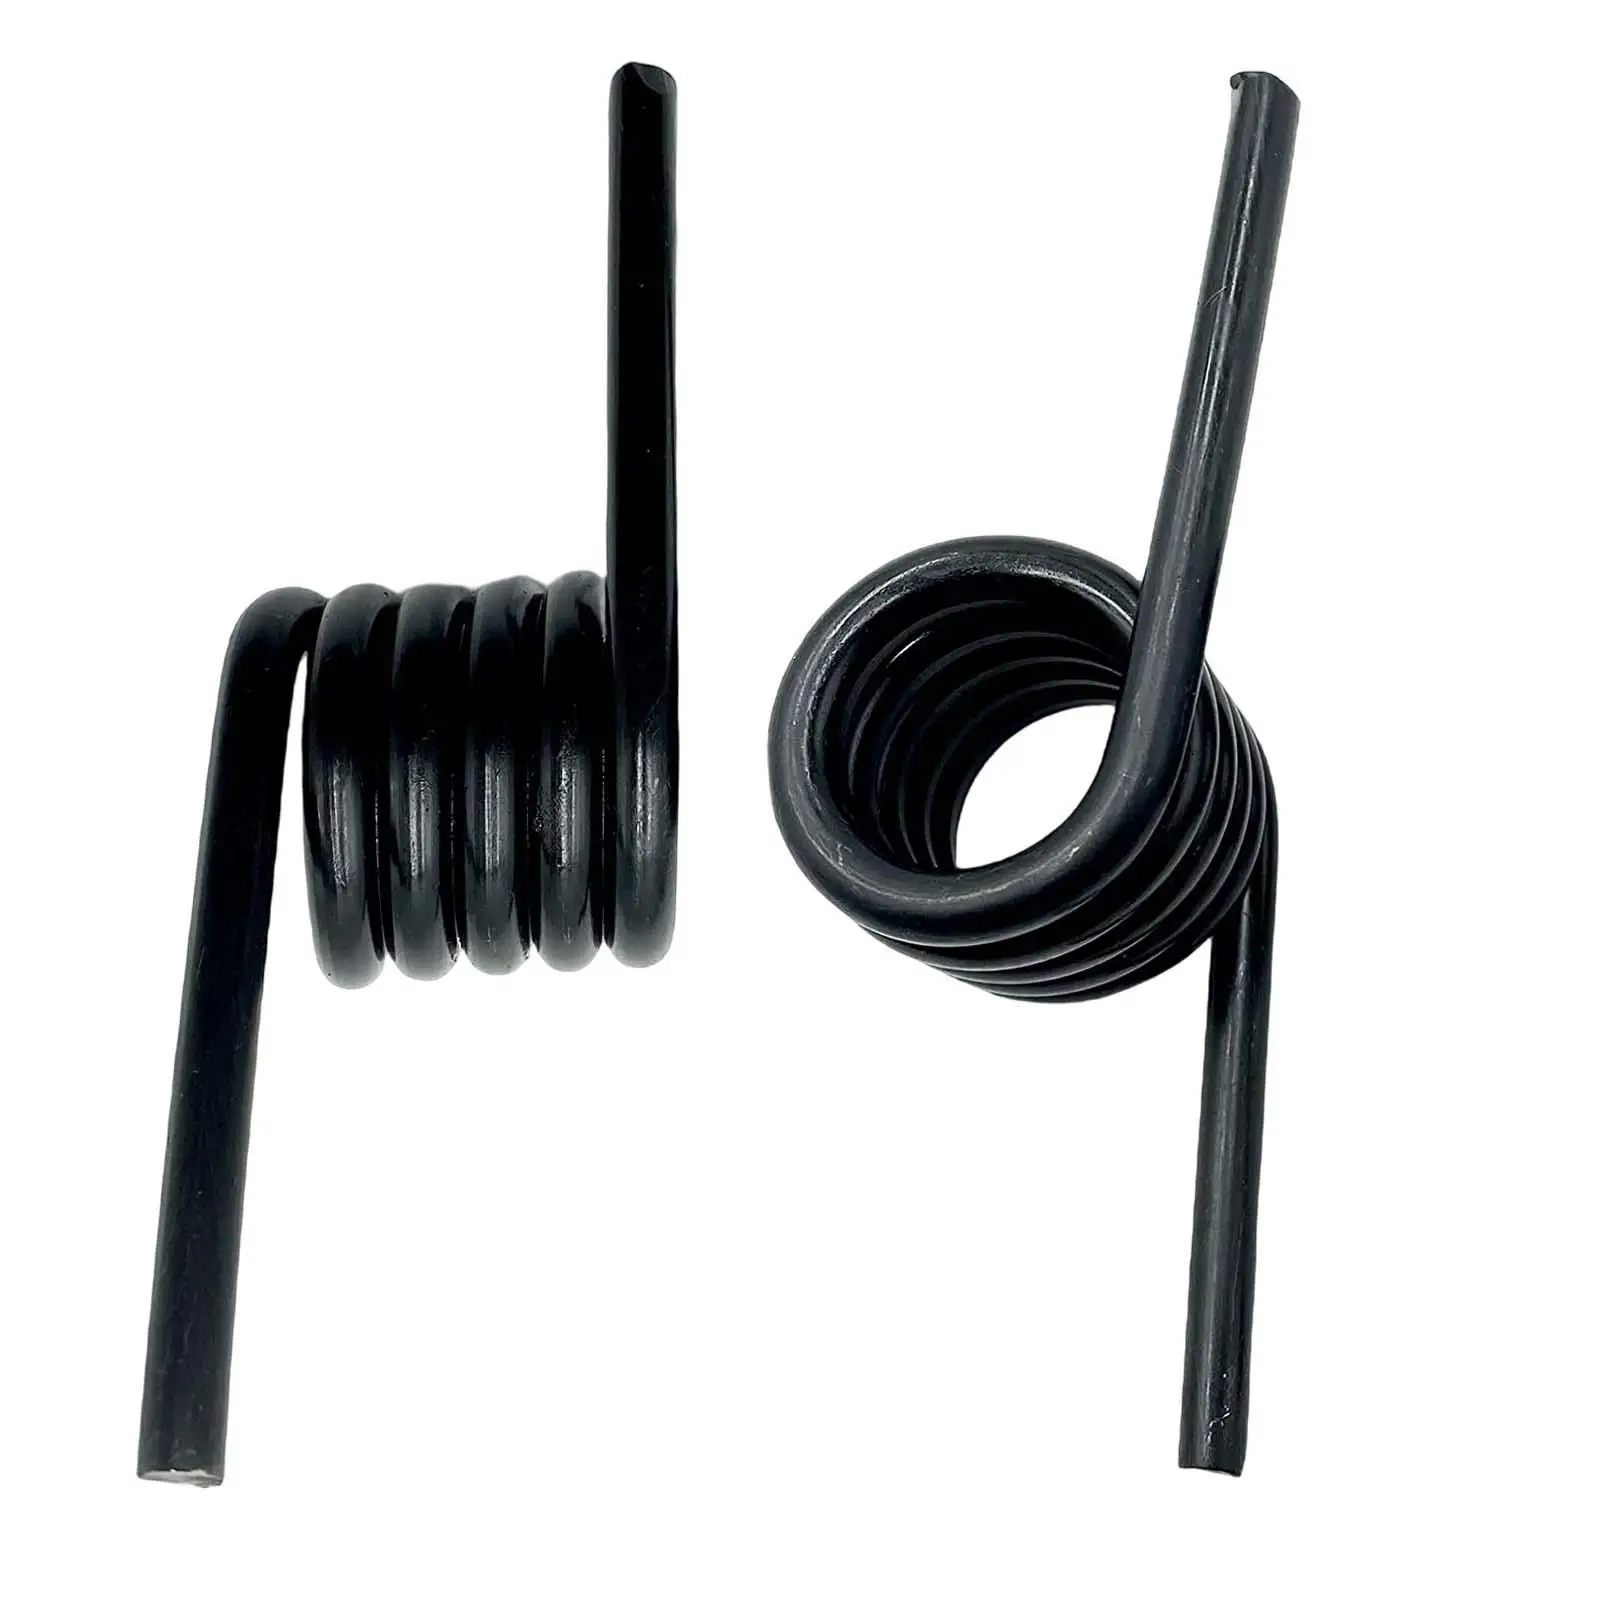 2x Torsion Ramp Spring 3034278 Left and Right Hand Black Replacement Part High for Trailer Ramps High Performance